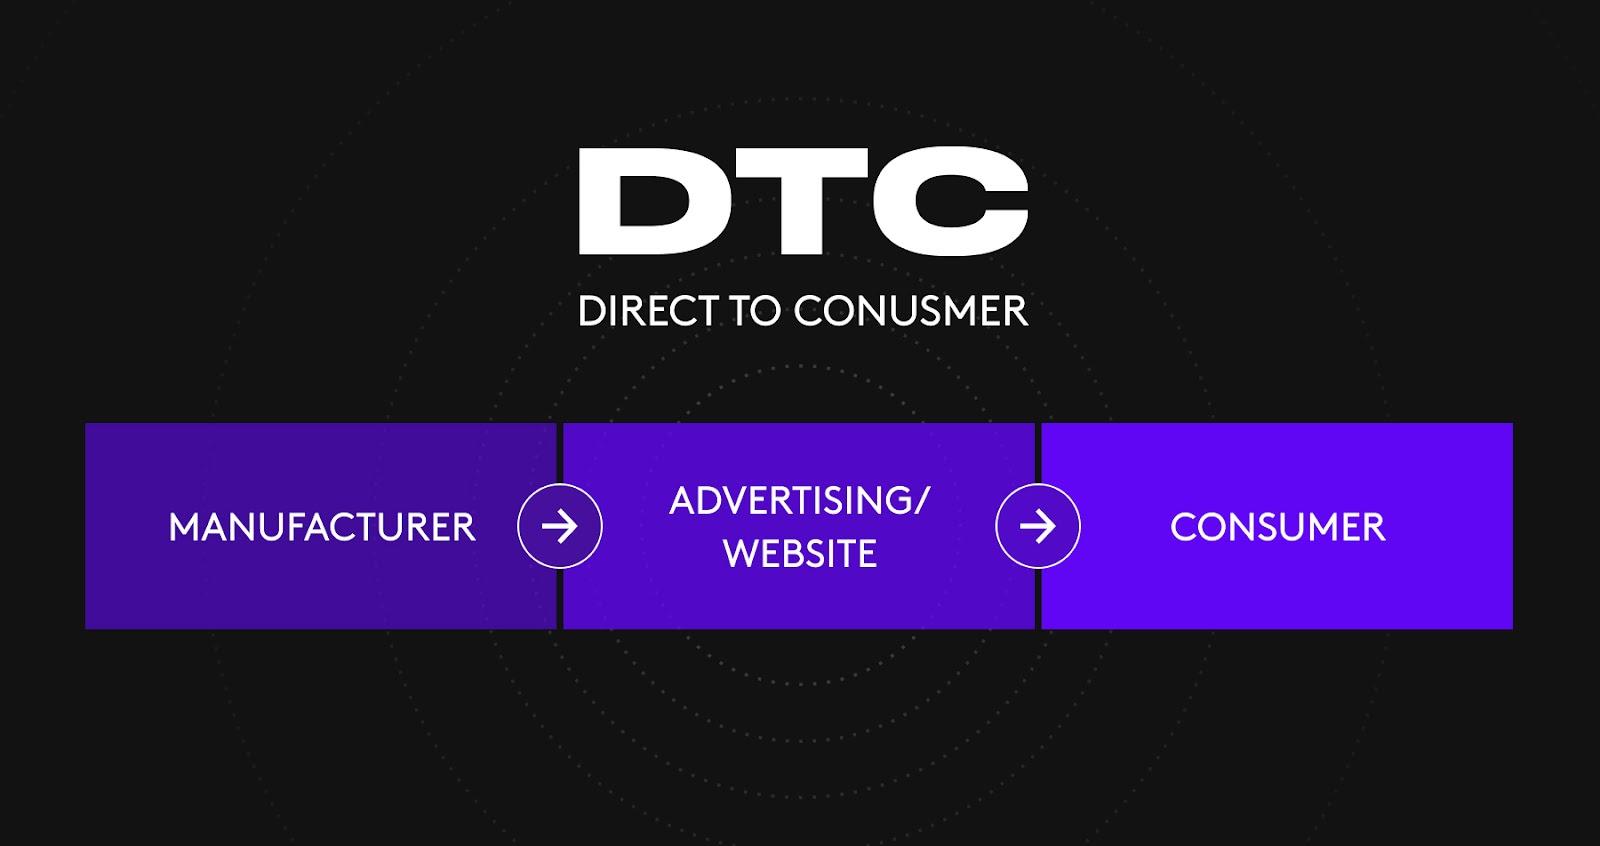 DTC ecommerce grants you control over distribution channels